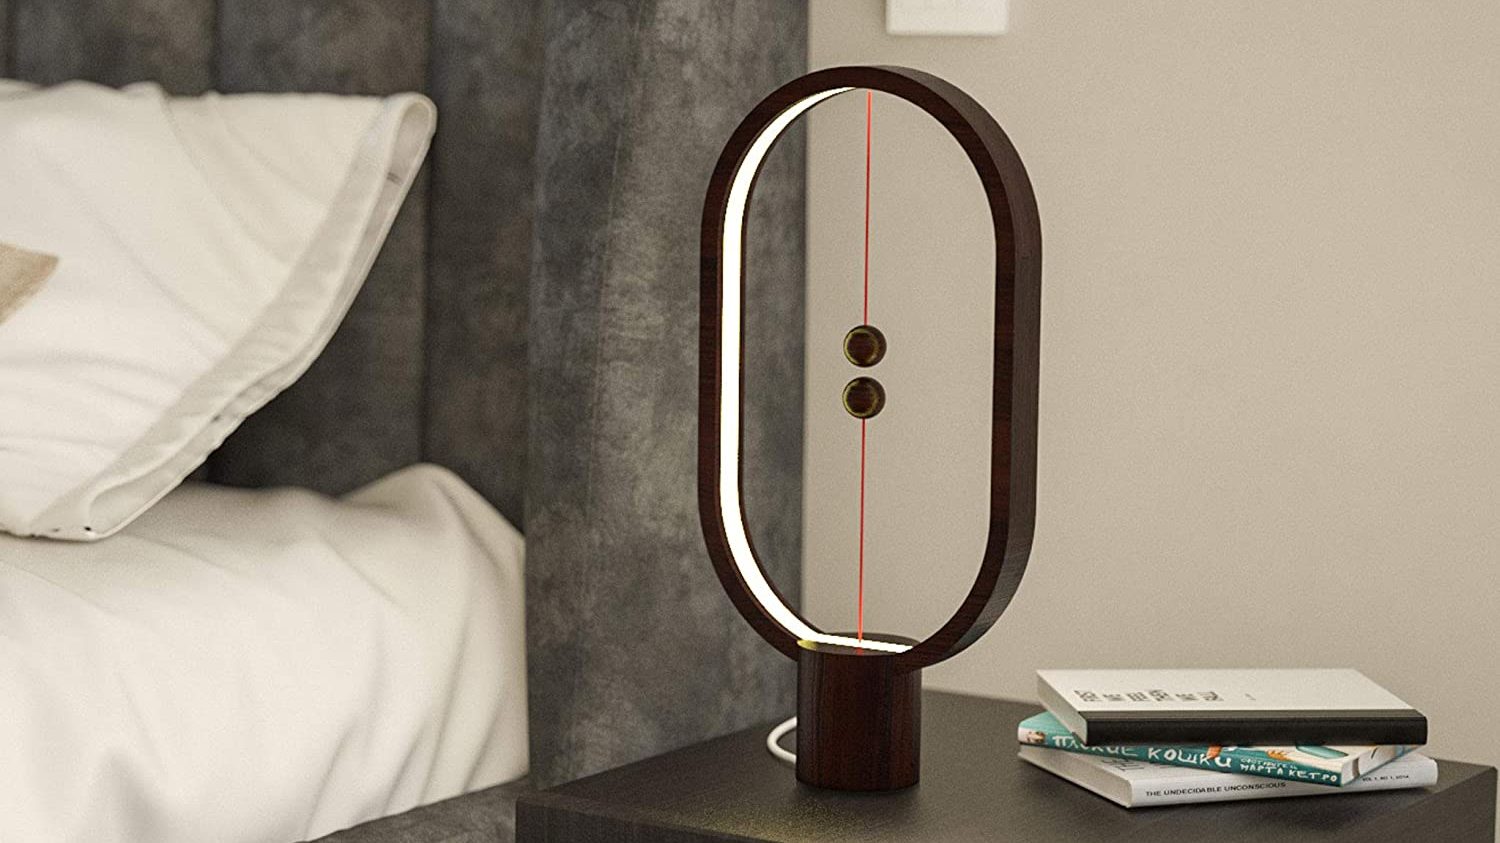 The traditional heng lamp resembles a Dyson fan